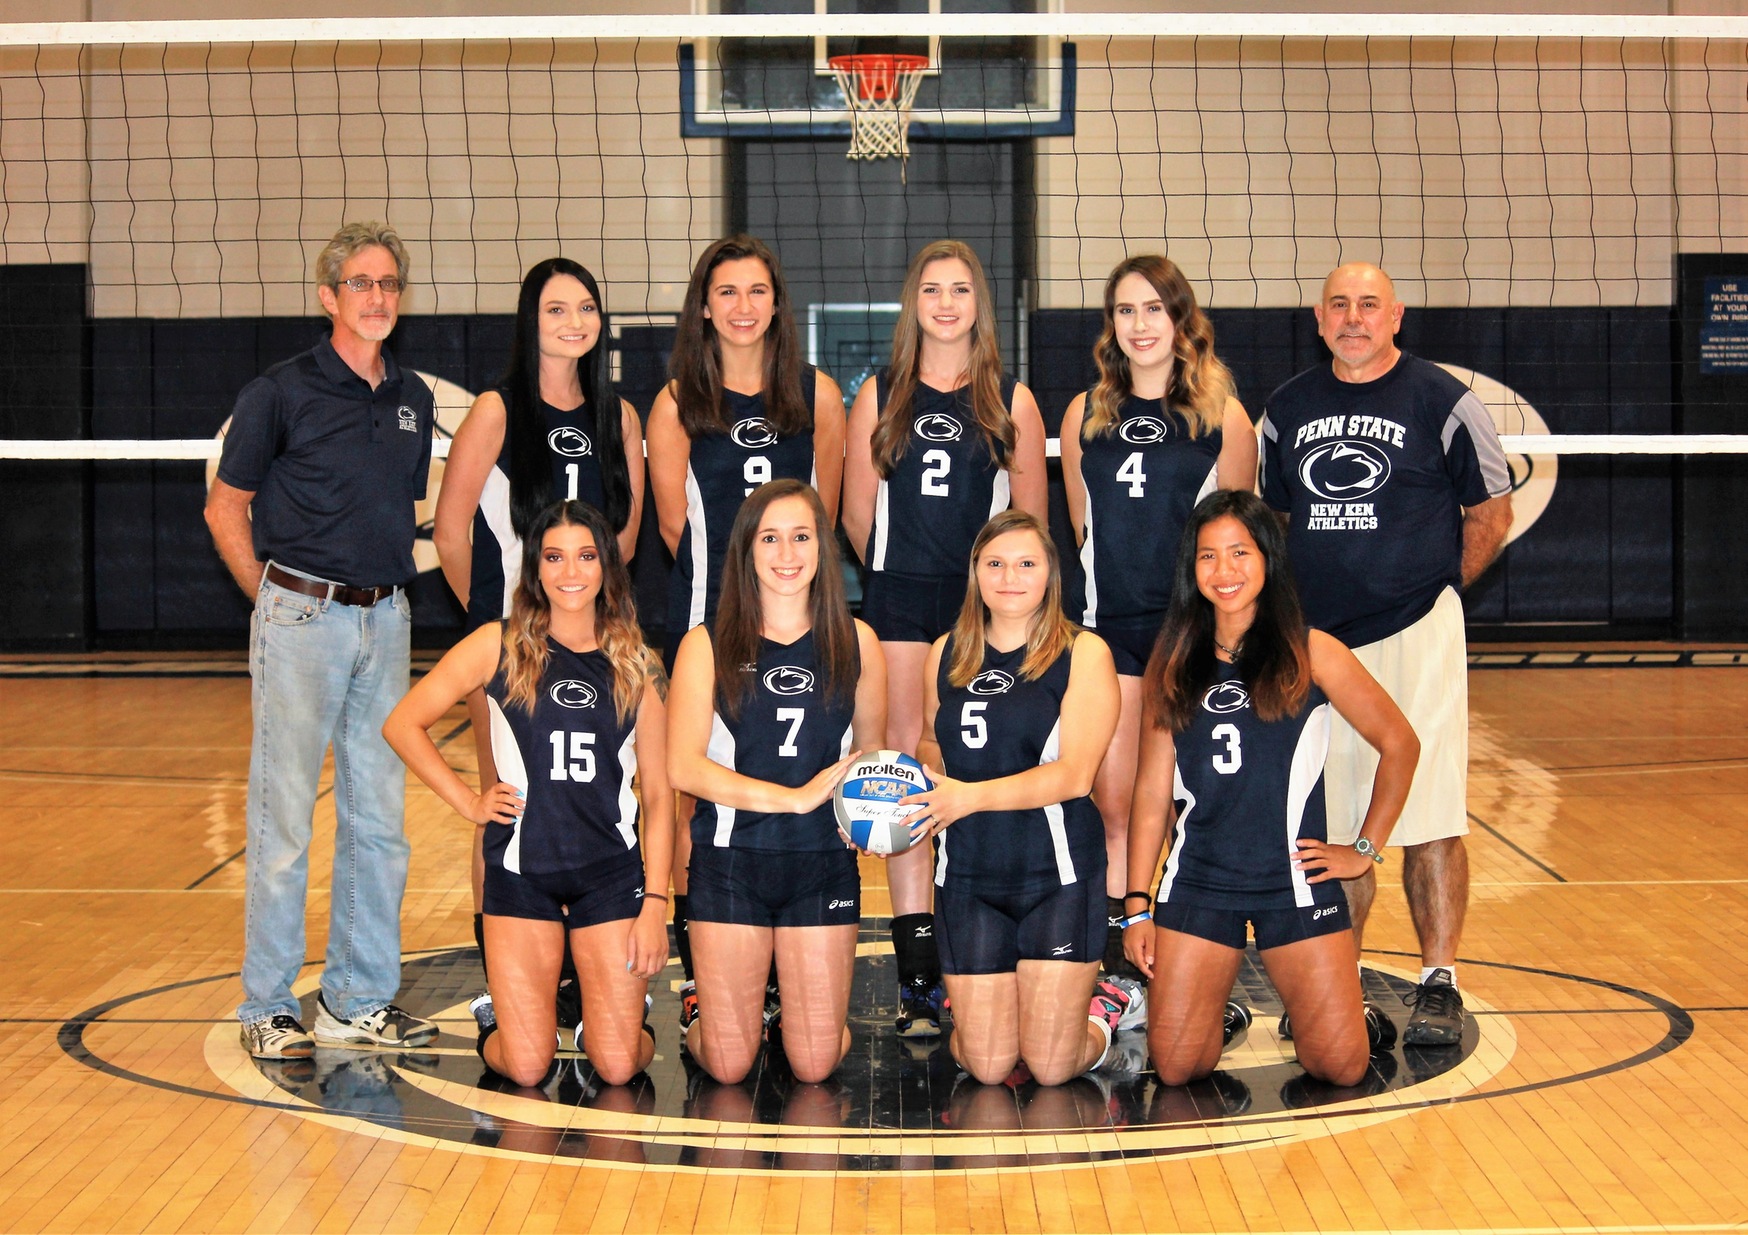 Women's Volleyball Splits on Day One of the PSUCA/WPCC Challenge